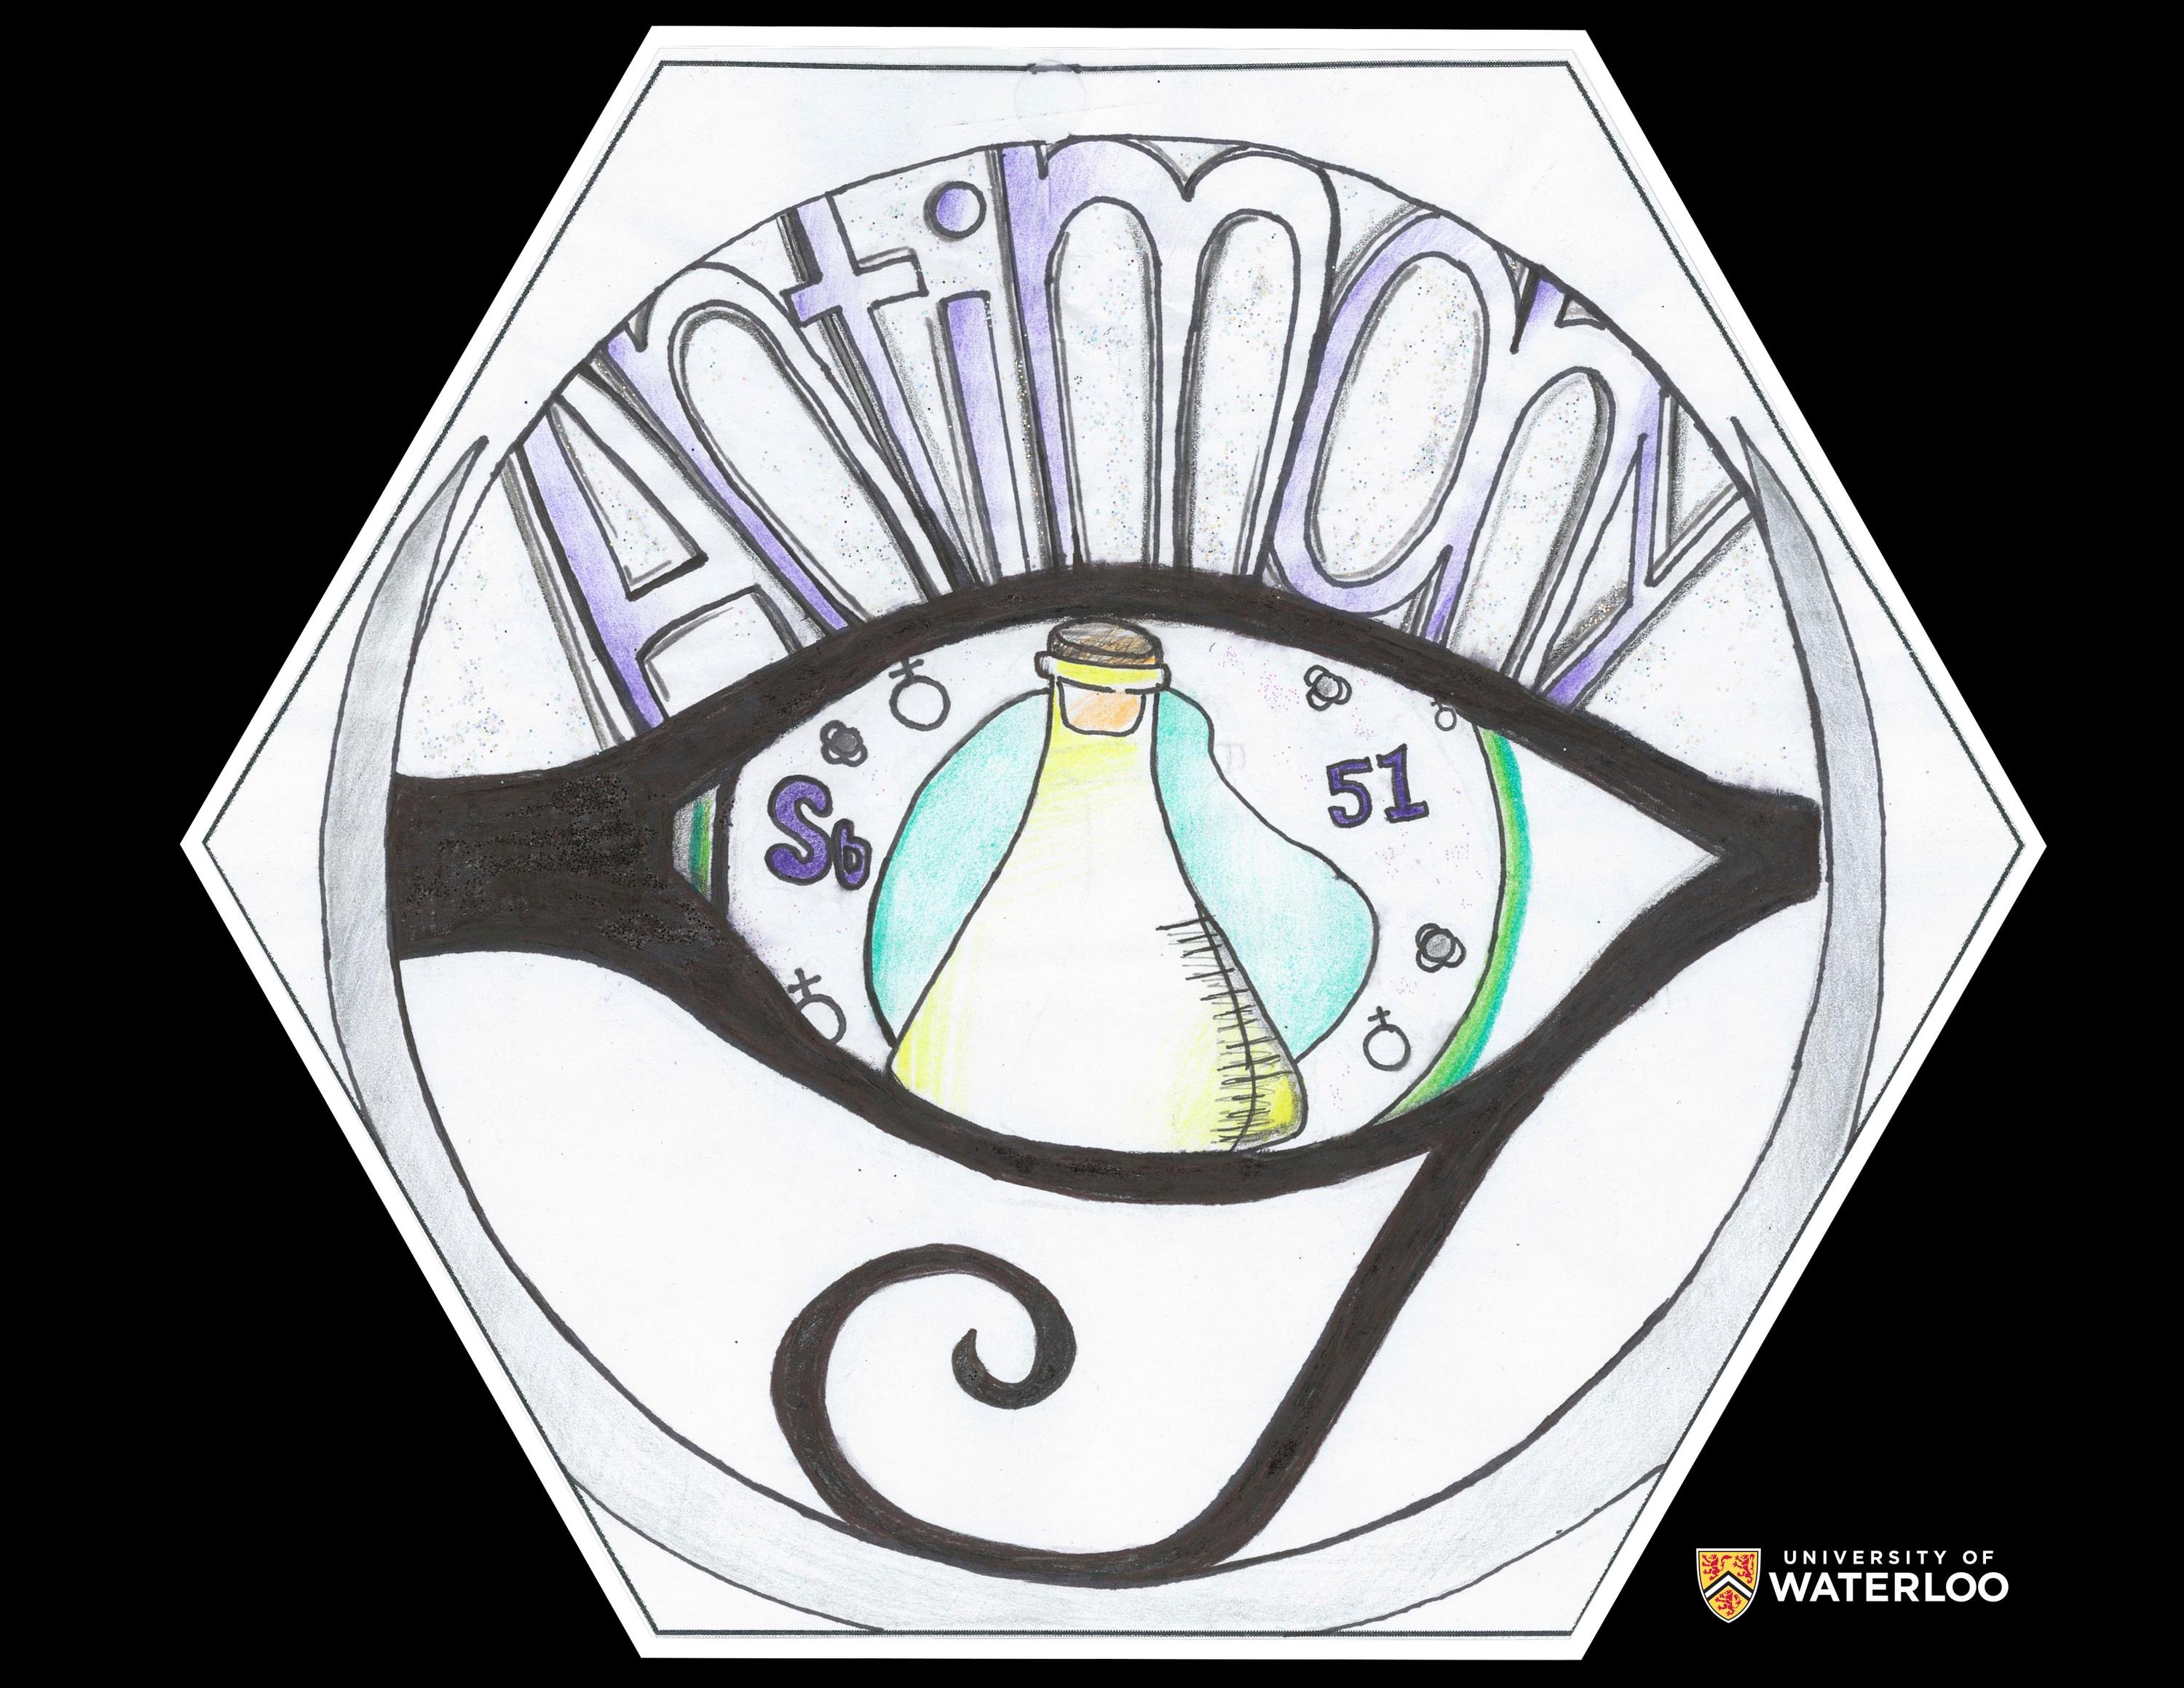 Coloured pencil and ink on white paper. A large Egyptian eye outlined in decorative black eyeliner dominates the tile. “Antimony” appears in purple lettering across the eyelid. Chemical symbol “Sb” and “51” appear in the eye along with an Erlenmeyer flask